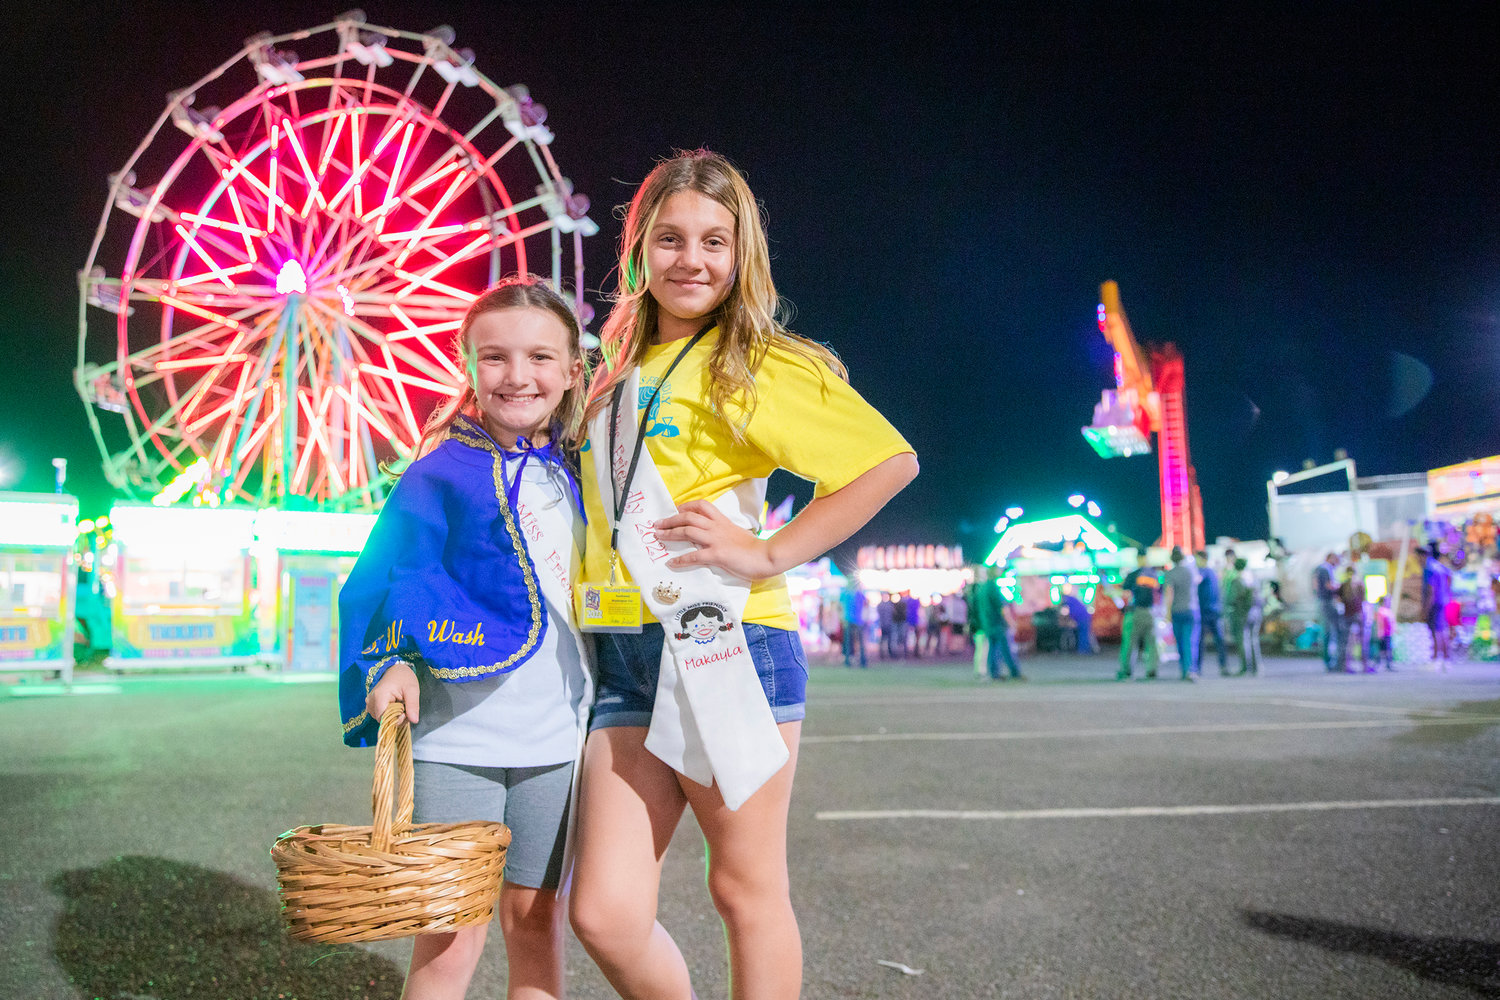 Newly caped Little Miss Friendly 2022 Emma Britton, left, poses with Little Miss Friendly 2021 MaKayla Maynard at the Southwest Washington Fair Tuesday night.